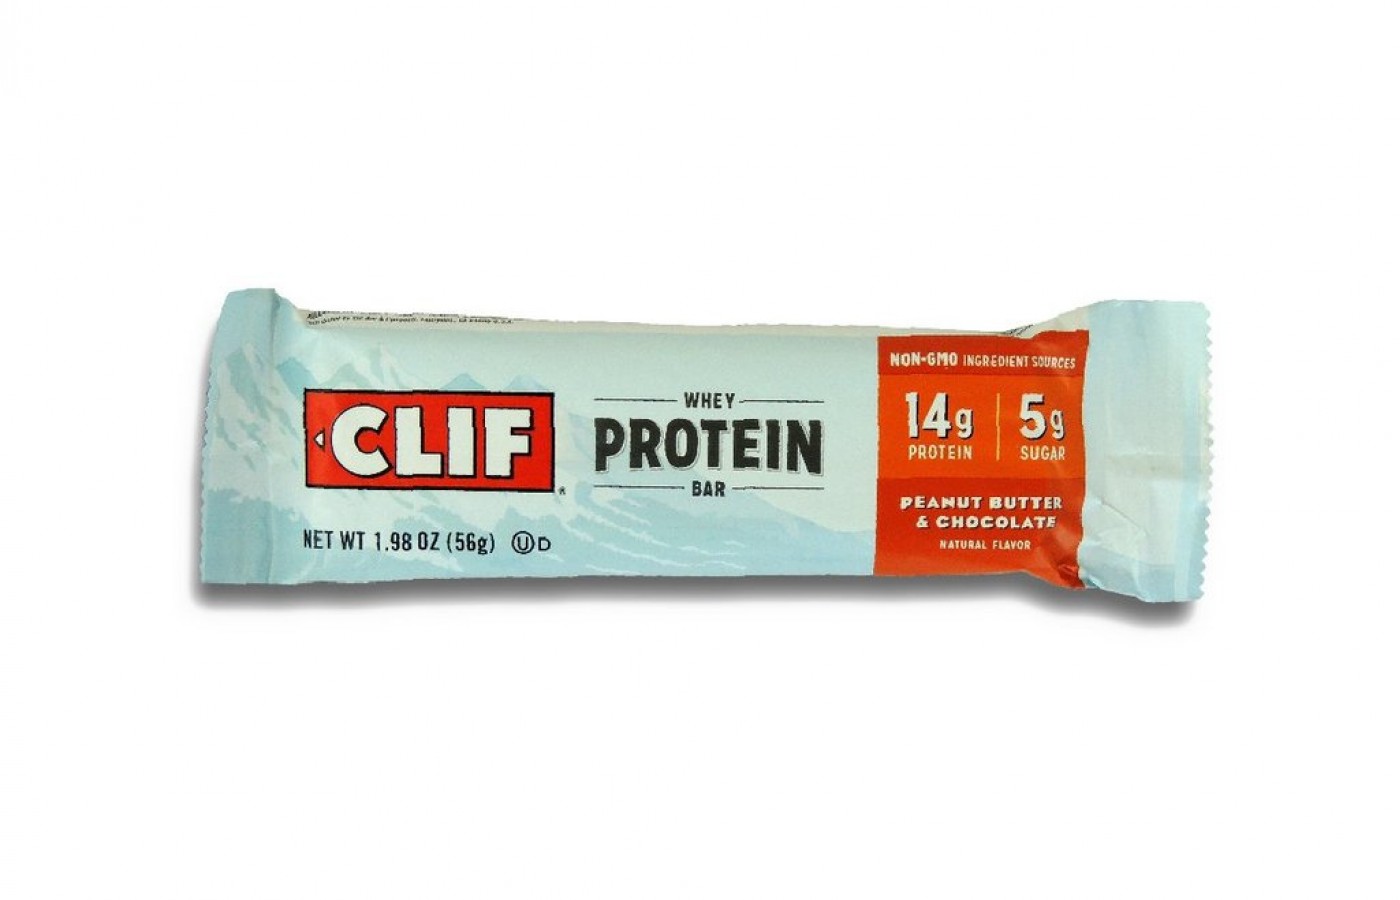 Their lower protein whey option.